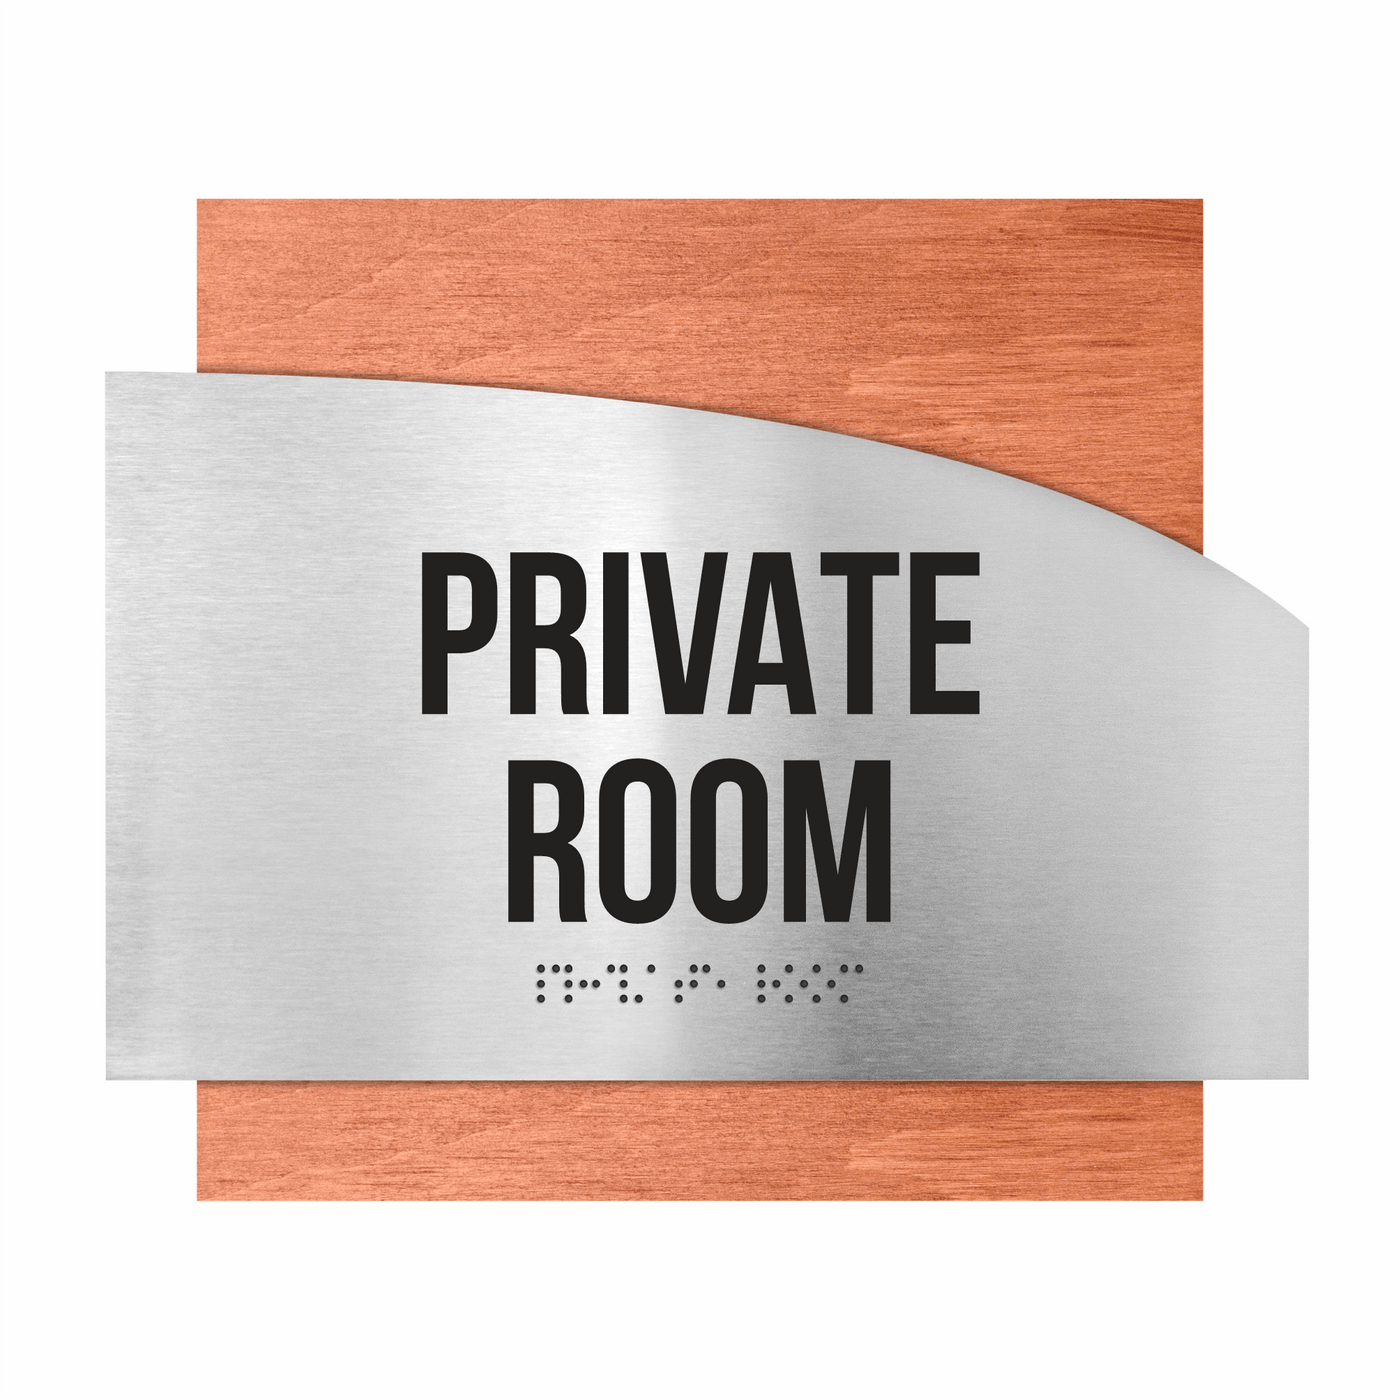 Door Signs - Private Room Signs - Stainless Steel & Wood Plate - "Wave" Design